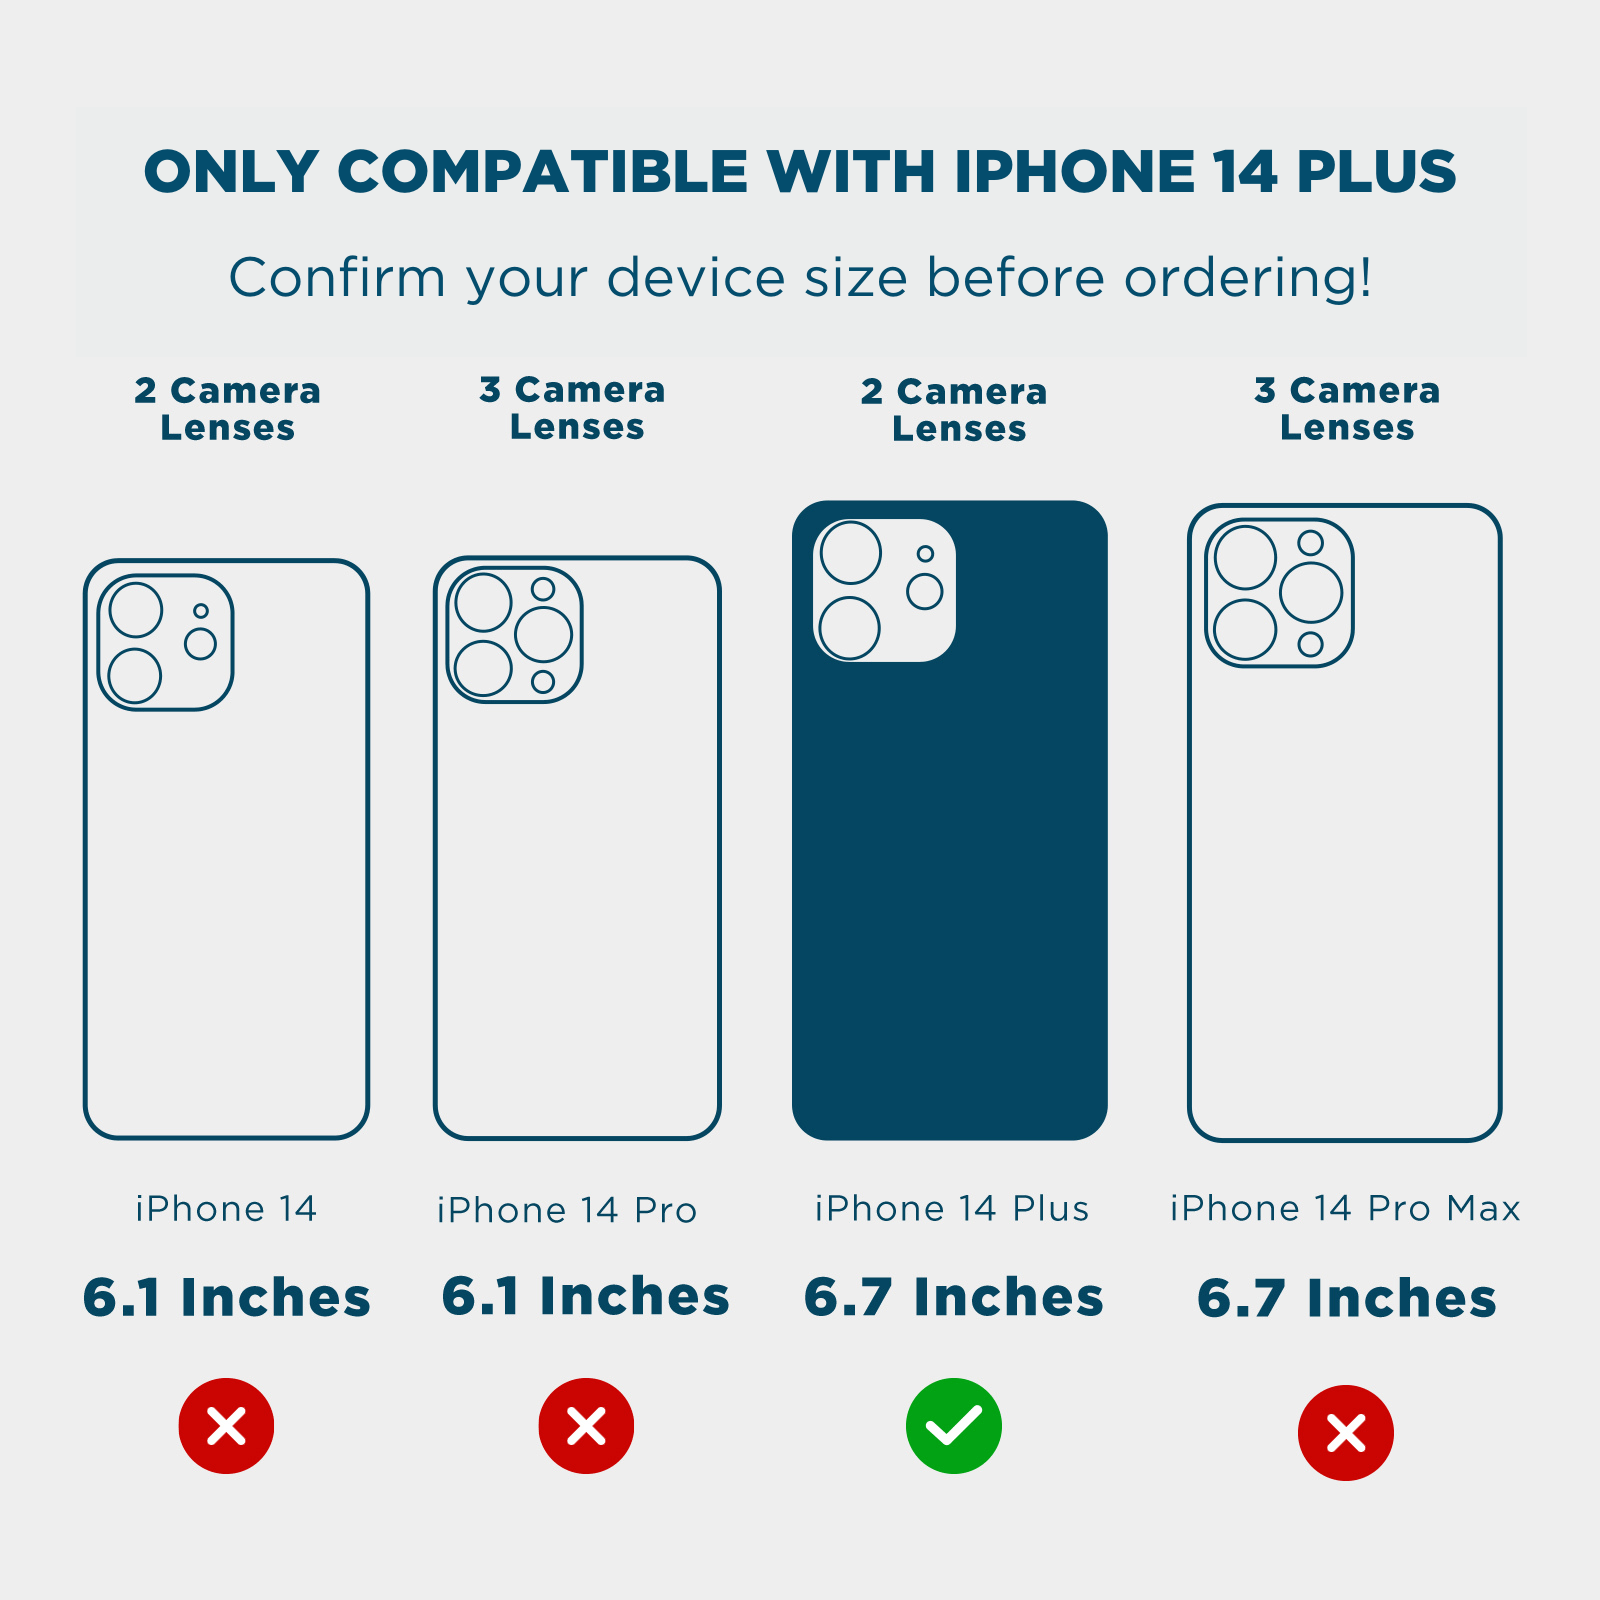 ONLY COMPATIBLE WITH IPHONE 14 PLUS. CONFIRM YOUR DEVICE SIZE BEFORE ORDERING! 2 CAMERA LENSES, 3 CAMERA LENSES, 2 CAMERA LENSES, 3 CAMERA LENSES, 6.1 INCHEC, 6.1 INCHES, 6.7 INCHES, 6.7 INCHES. COLOR::BRILLIANCE CHANDELIER